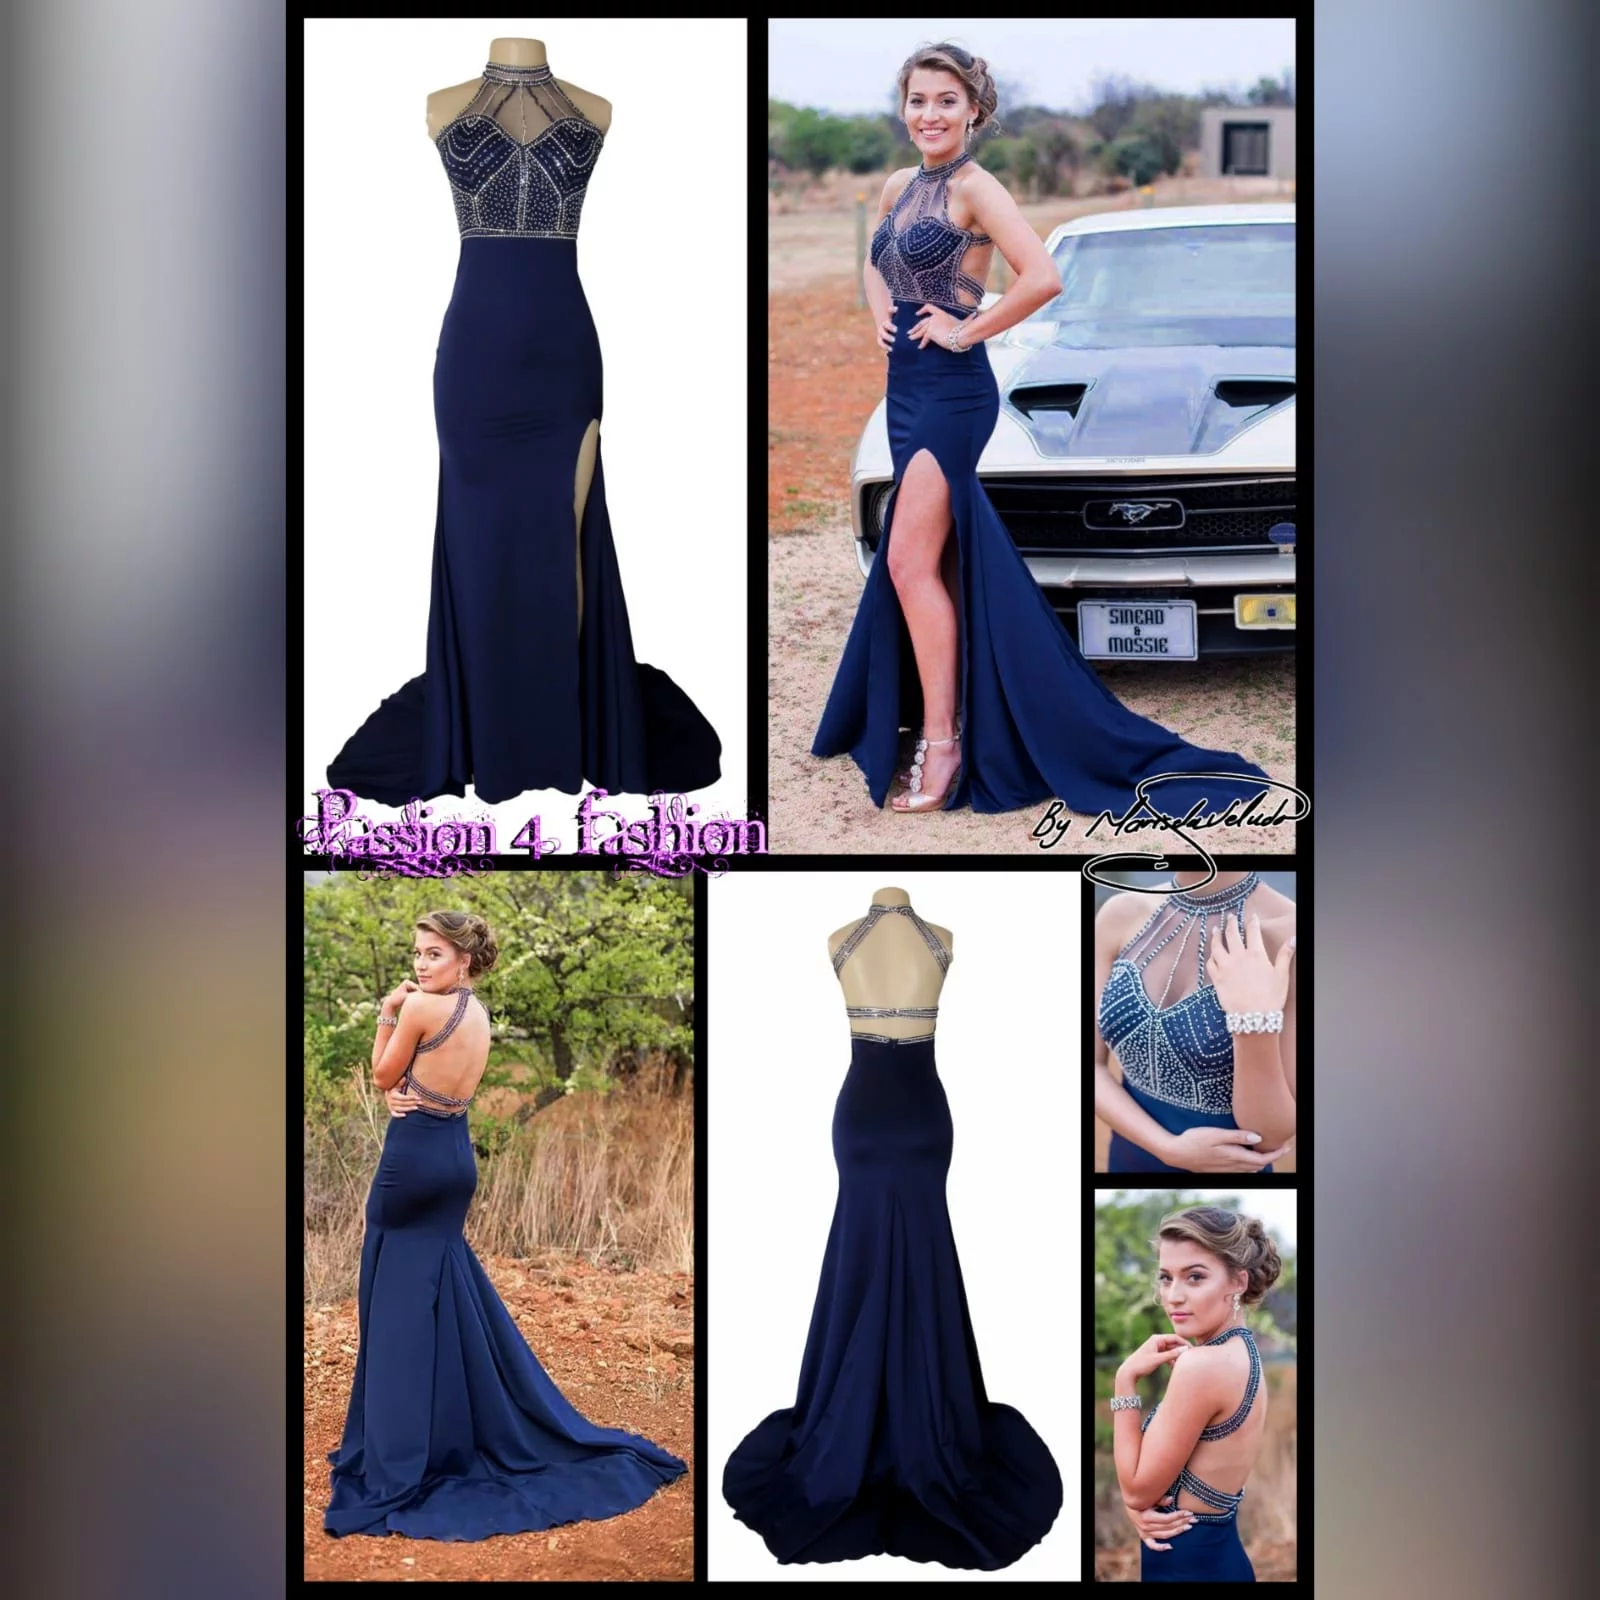 Navy blue silver beaded prom dress 5 navy blue silver beaded prom dress with an illusion neckline and a choker effect. Backless design detailed with beaded straps. Fitted bottom with a slit and a train.